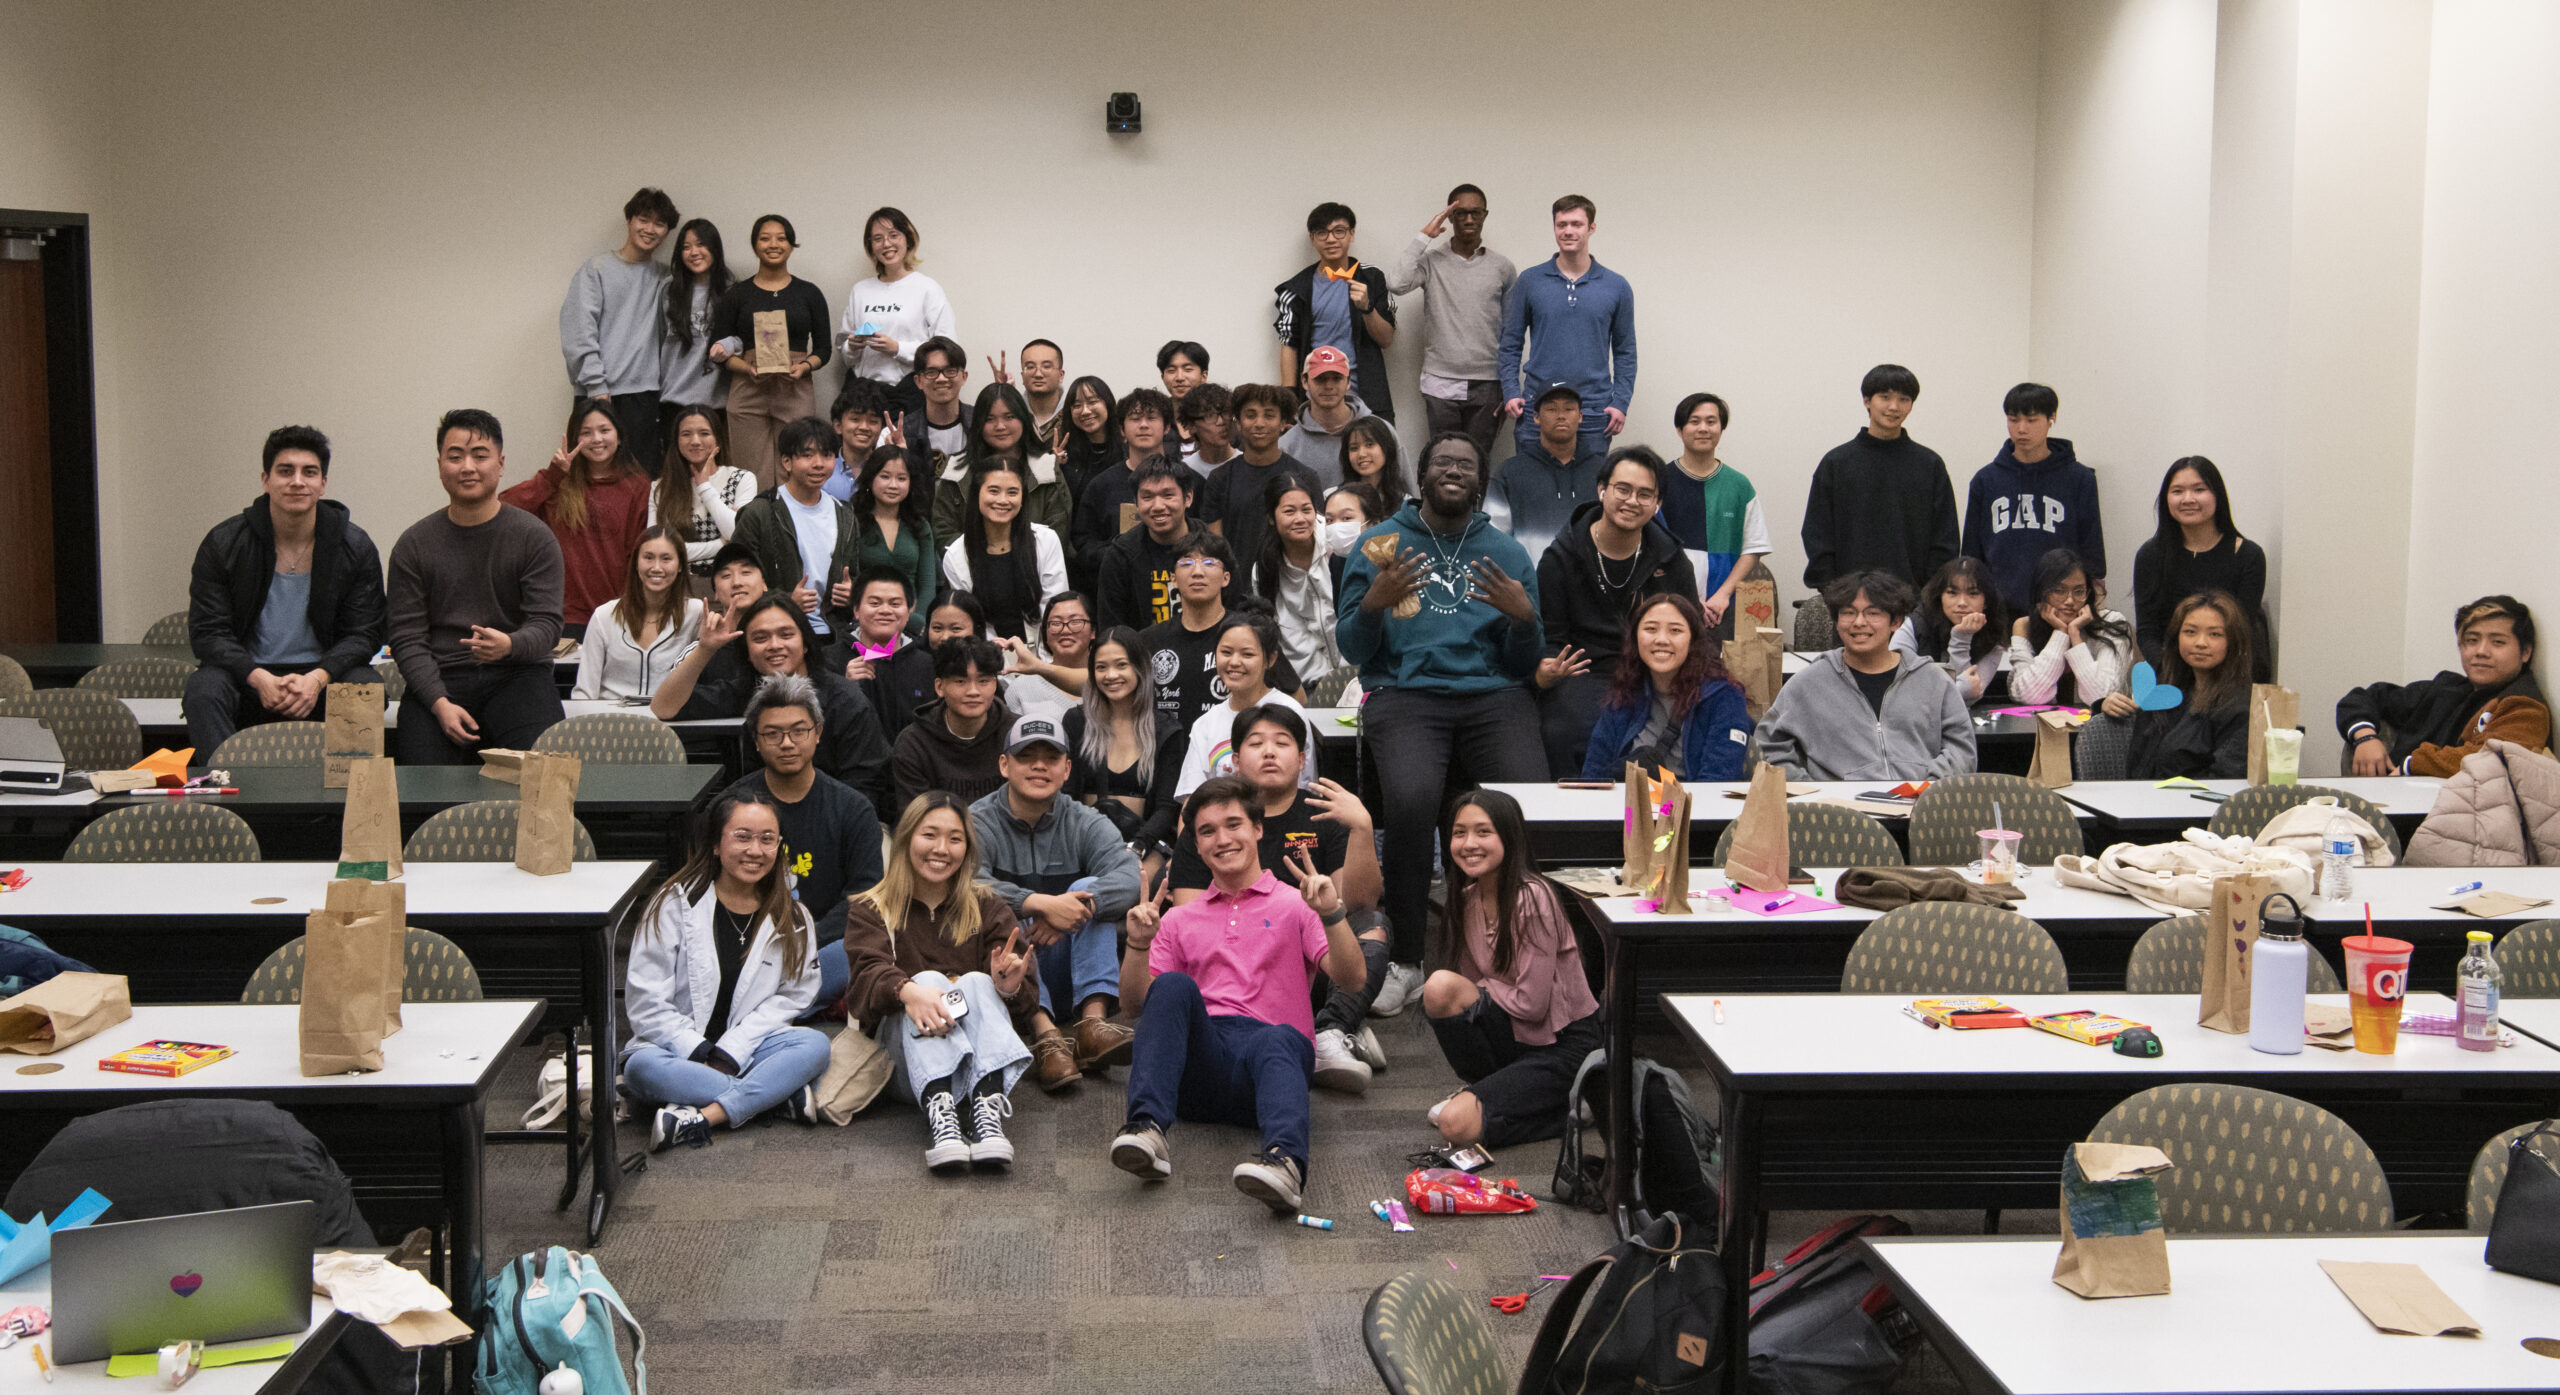 Club of the week: Vietnamese Student Association encourages member socialization